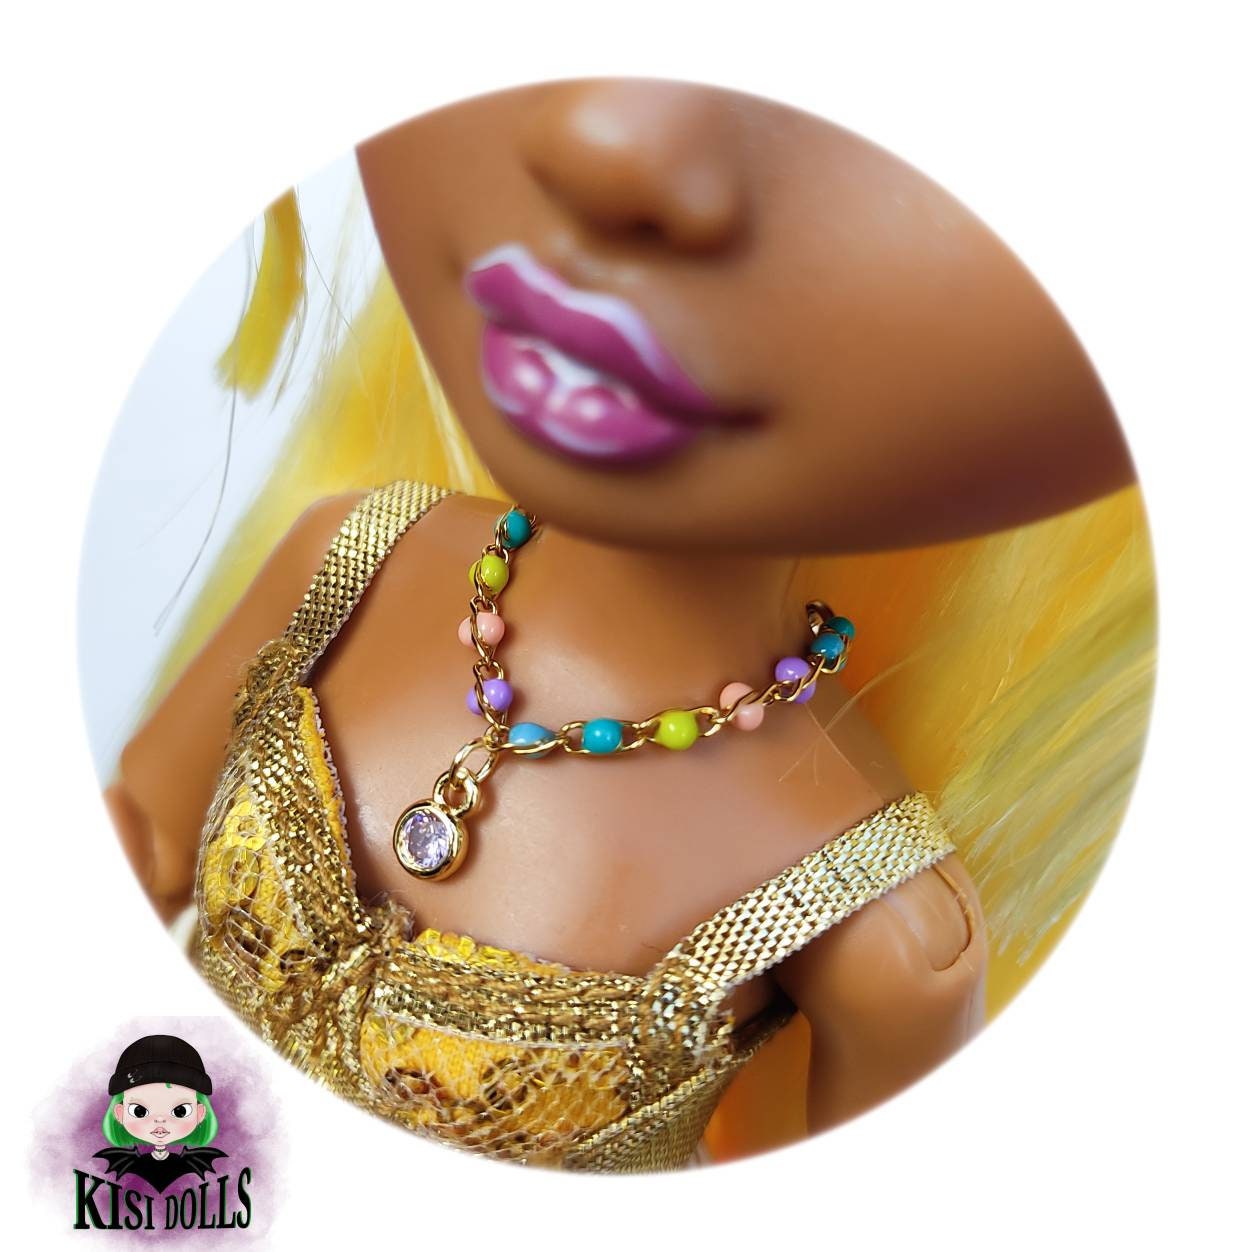 Barbie Dreamz BROWN & GOLD PEARLS Necklace & Earrings Doll Jewelry 